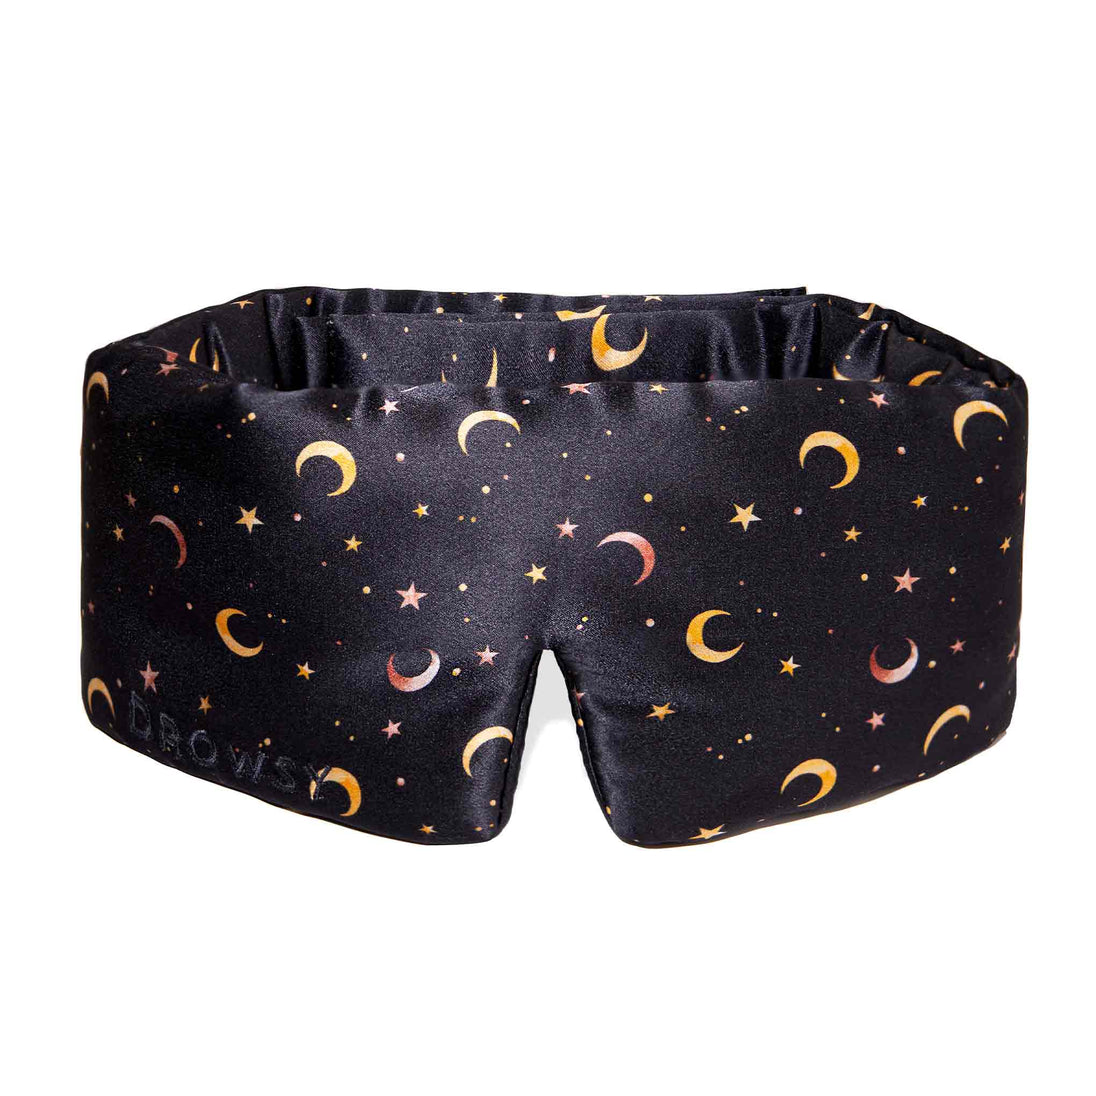 Starry pattern Drowsy sleep mask on white background